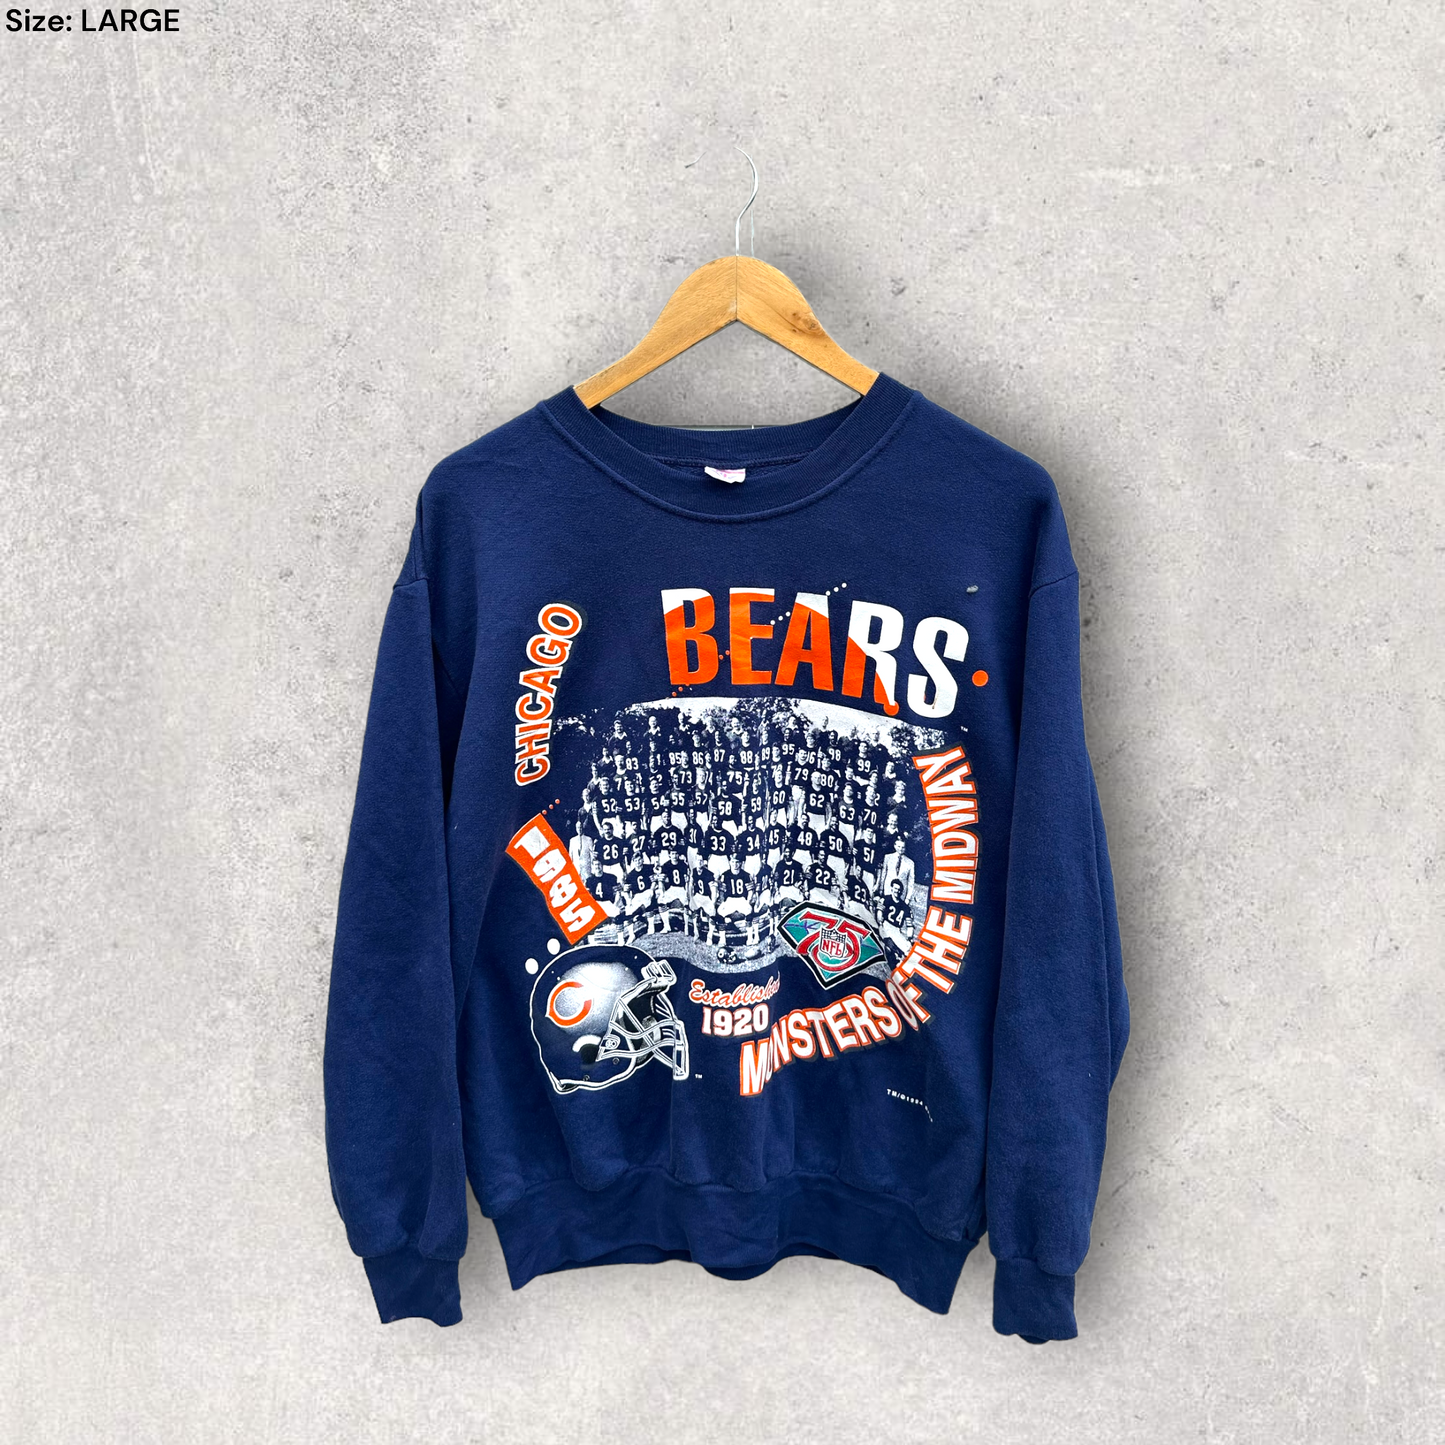 CHICAGO BEARS 1994 VINTAGE SWEATER